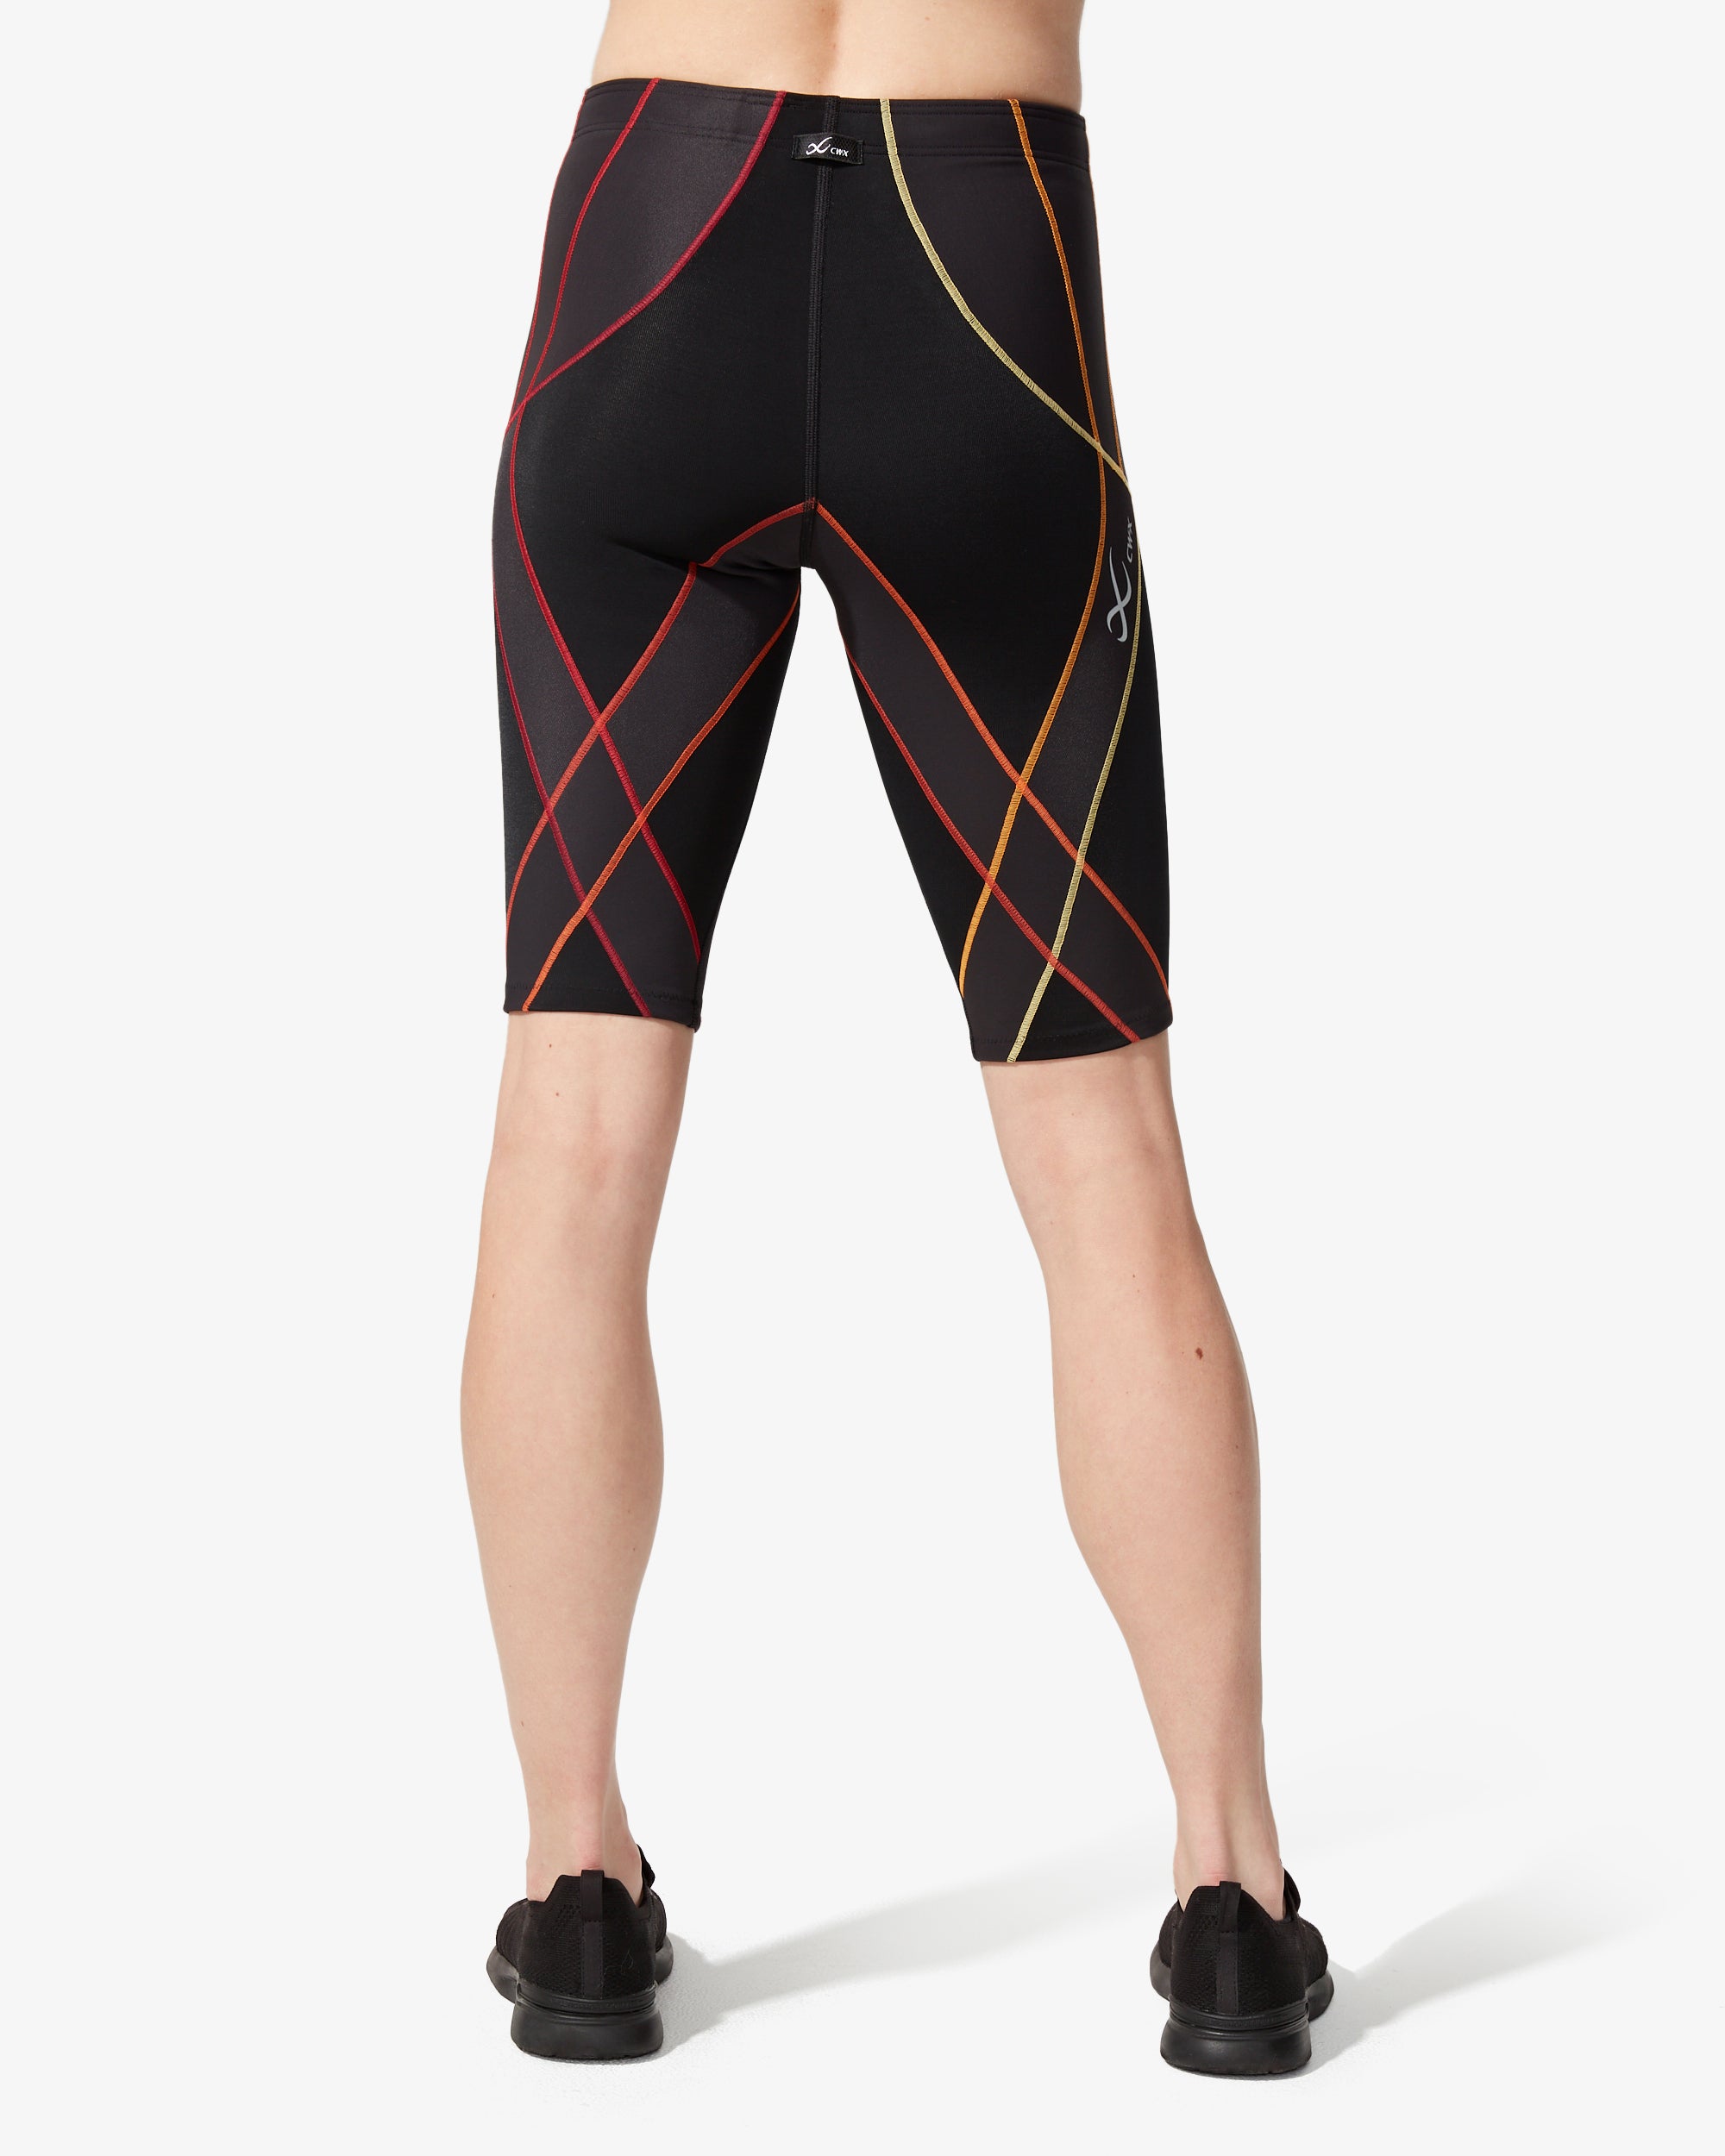 Endurance Generator Joint & Muscle Support Compression Shorts - Women's  Black/Gradient Rooibos